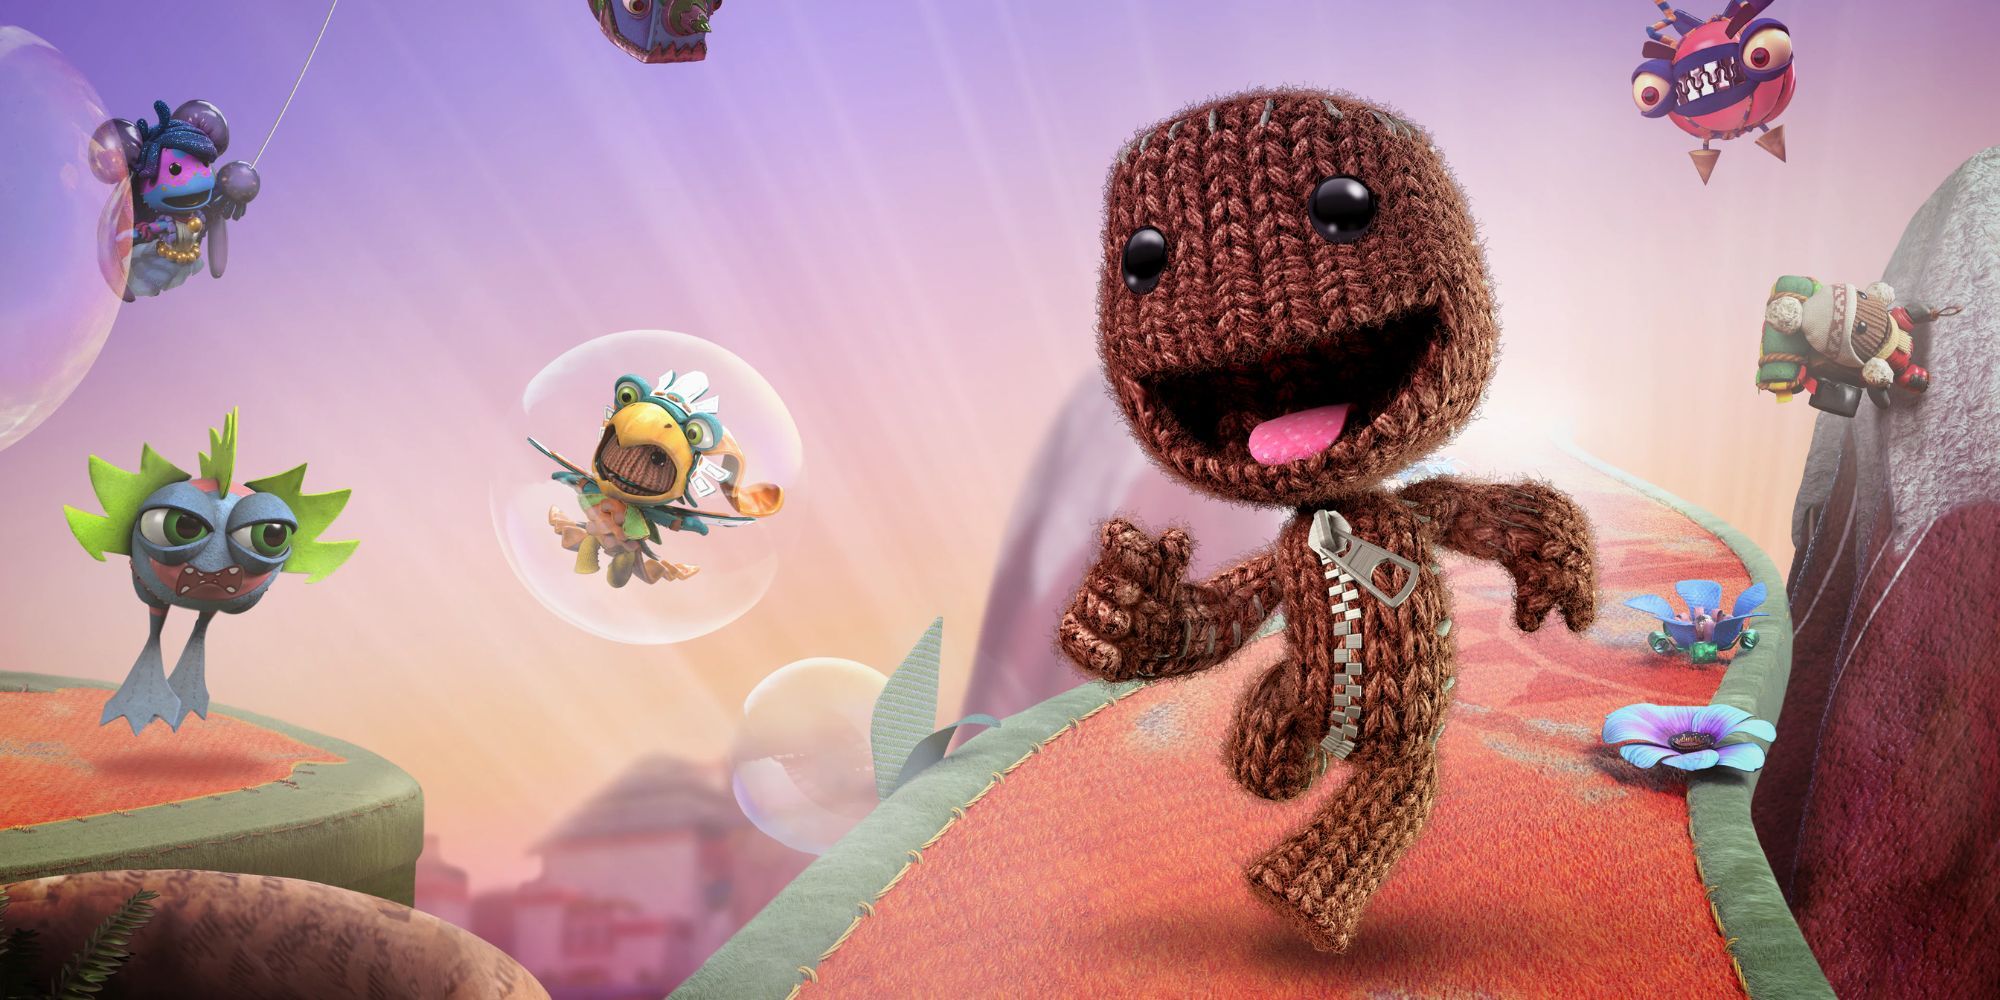 Sackboy runs down a path surrounded by enemies